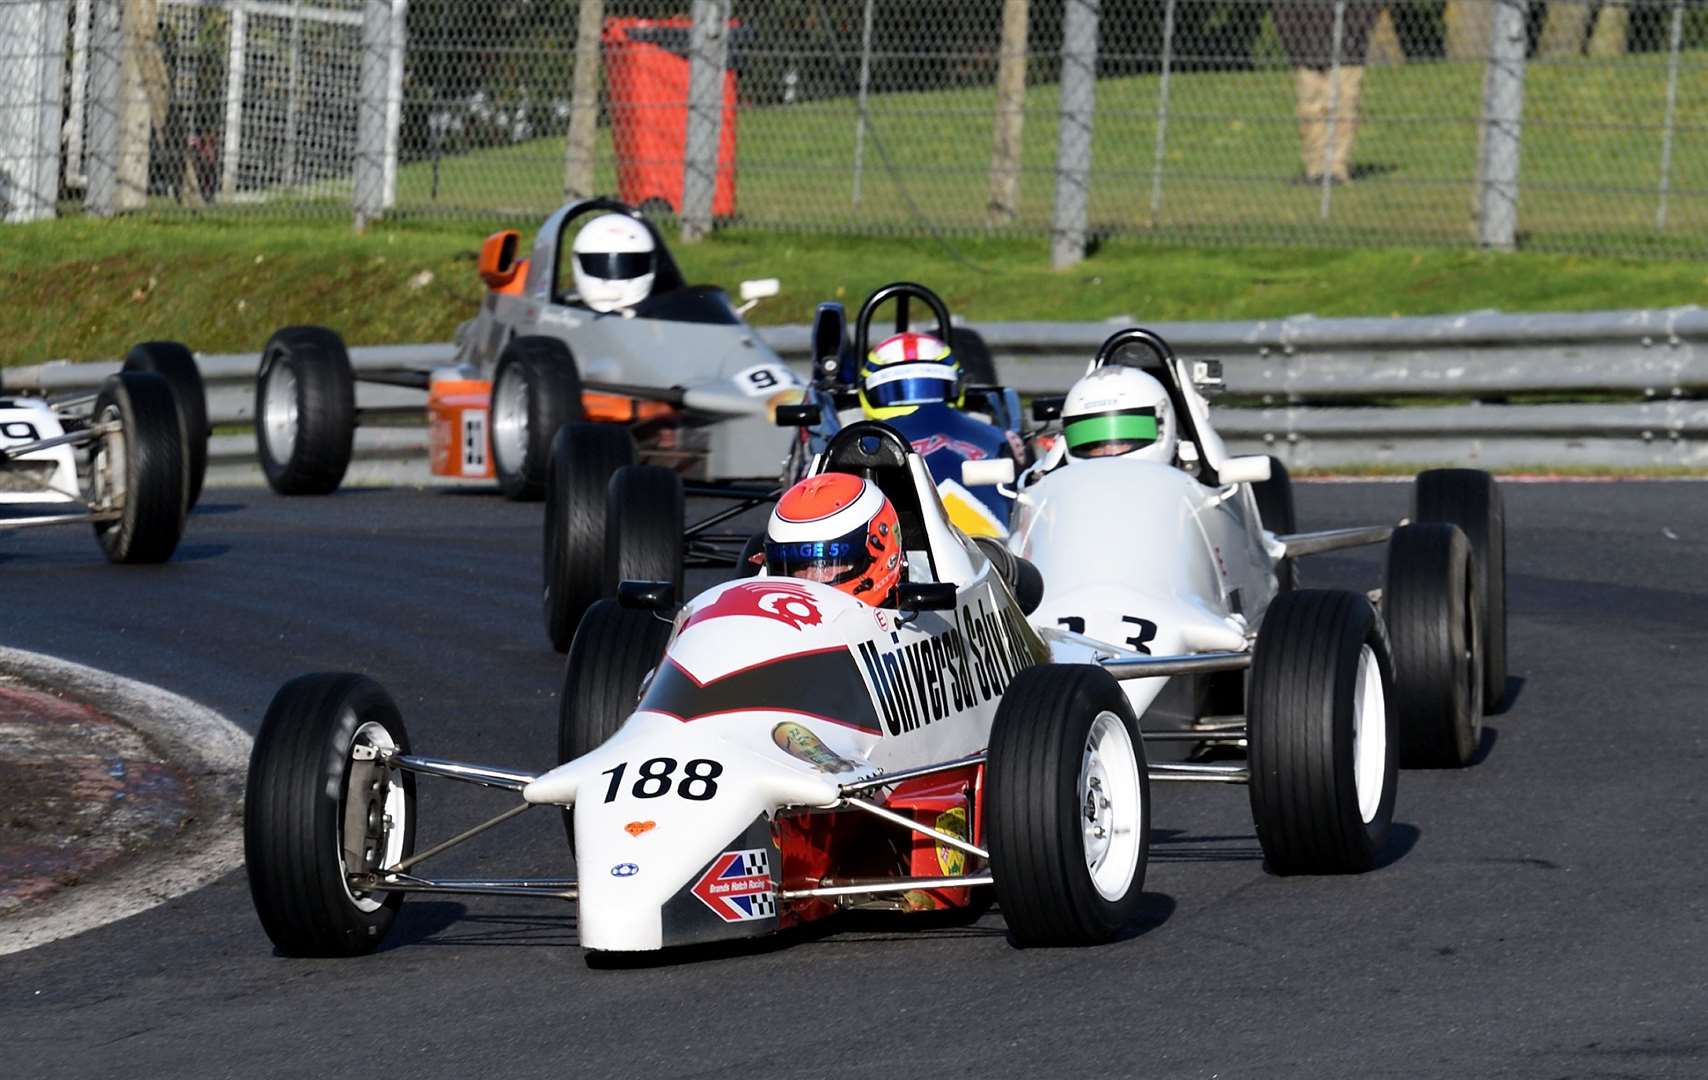 Goodwin turns into Druids on Sunday. He has recently bought back the Van Diemen, with which he won the 1989 Champion of Brands series. He narrowly missed a top-six place and getting into this year's Festival final after finishing seventh in the Last Chance Race. Picture: Simon Hildrew